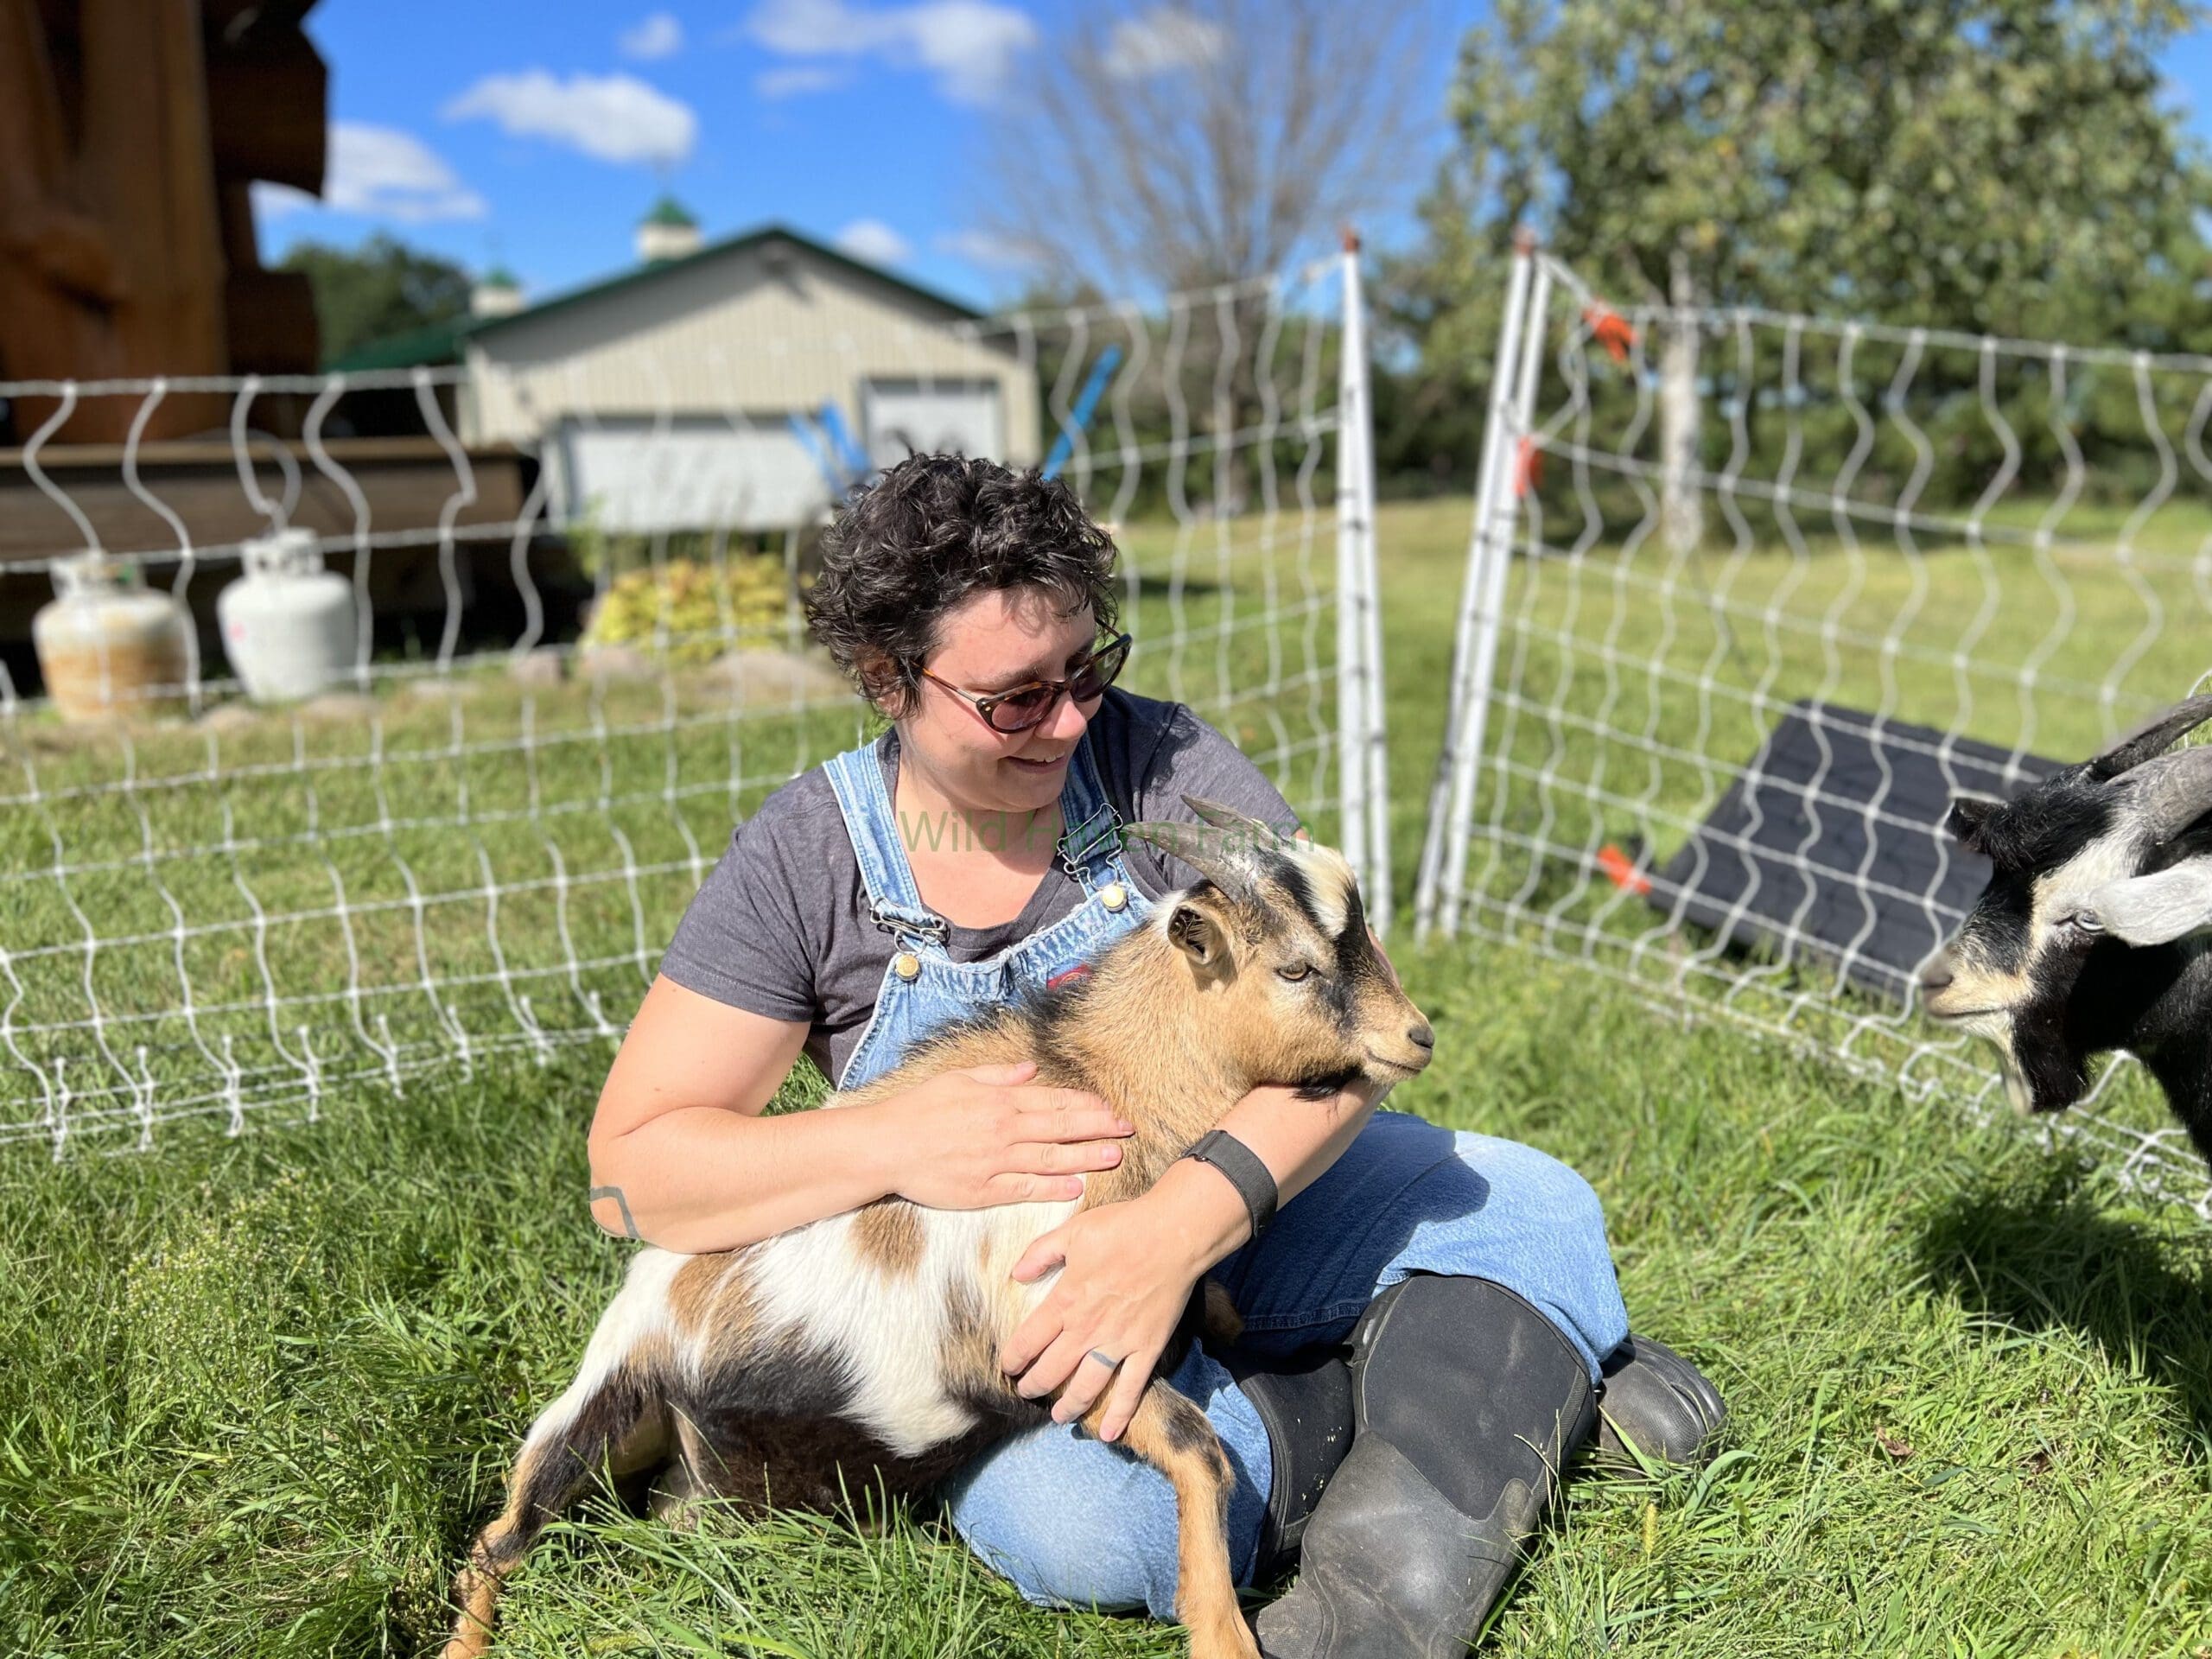 Woman sitting on lawn holding a bucking goat